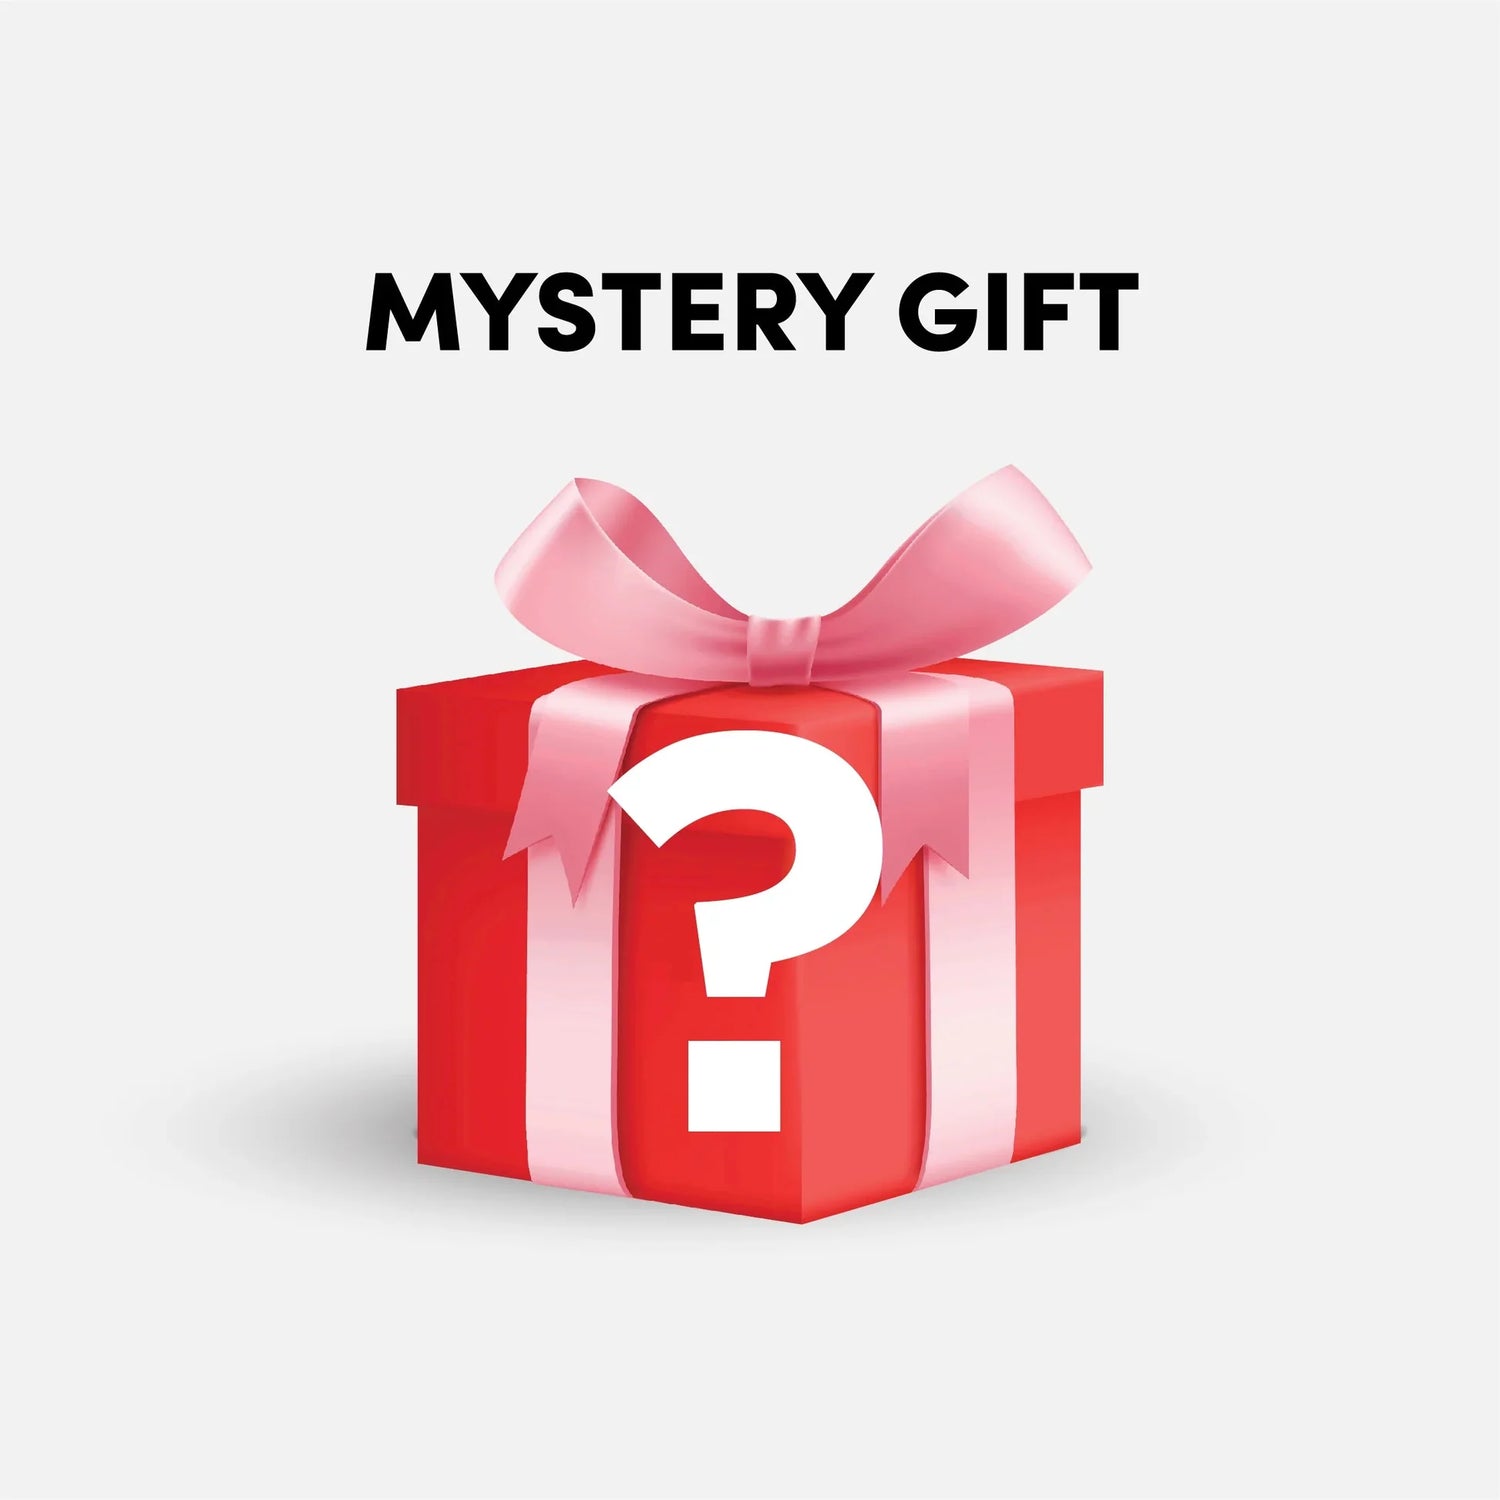 Free Mystery Gift